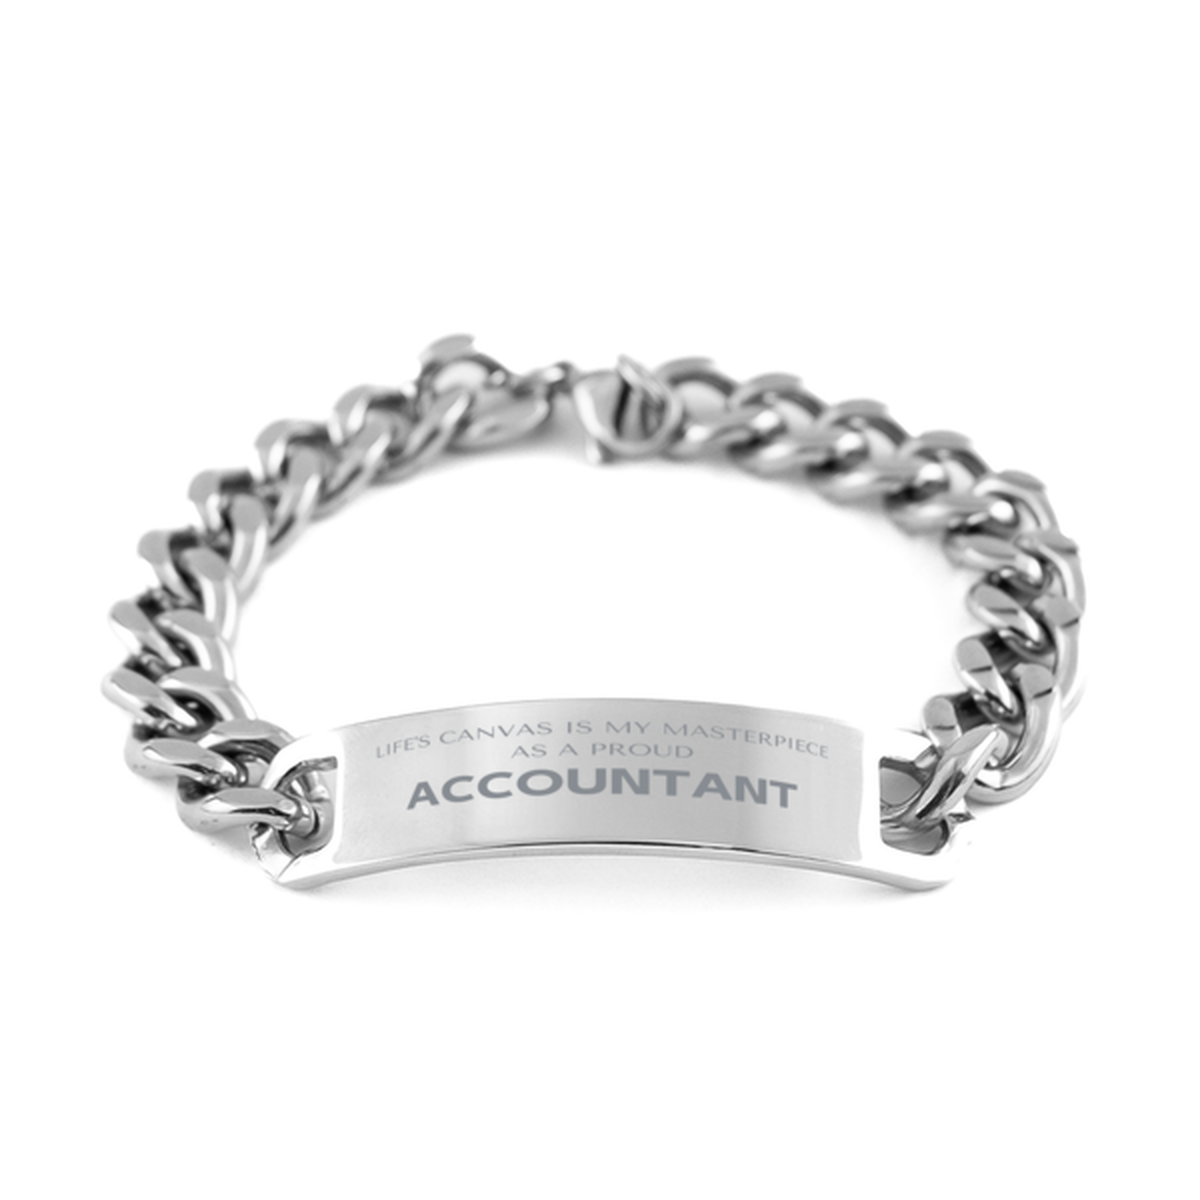 Proud Accountant Gifts, Life's canvas is my masterpiece, Epic Birthday Christmas Unique Cuban Chain Stainless Steel Bracelet For Accountant, Coworkers, Men, Women, Friends